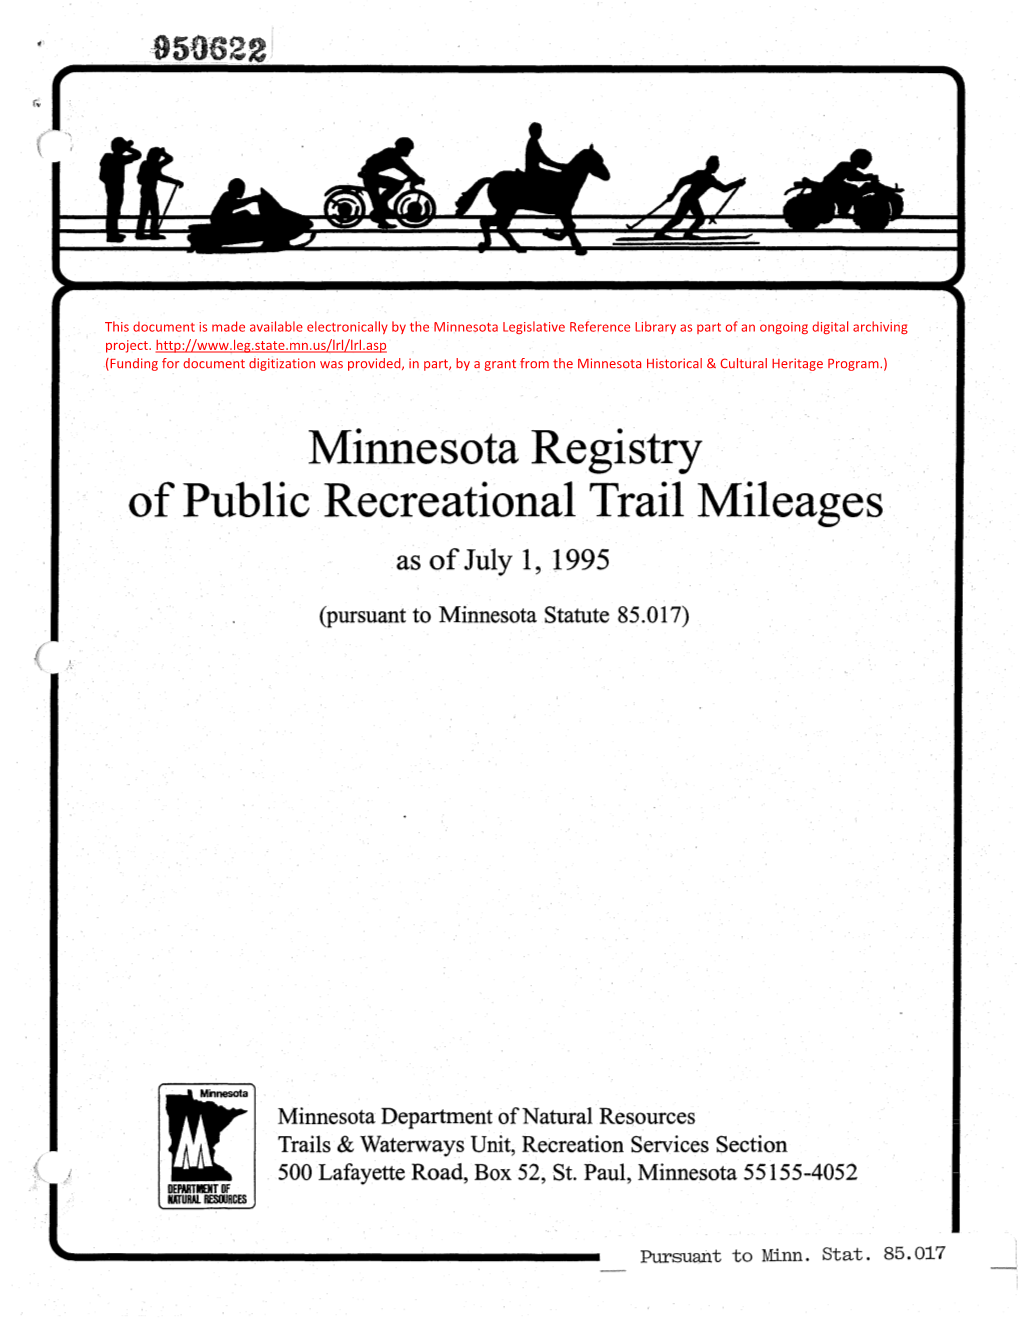 Minnesota Registry of Public Recreational Trail Mileages As of July 1, 1995